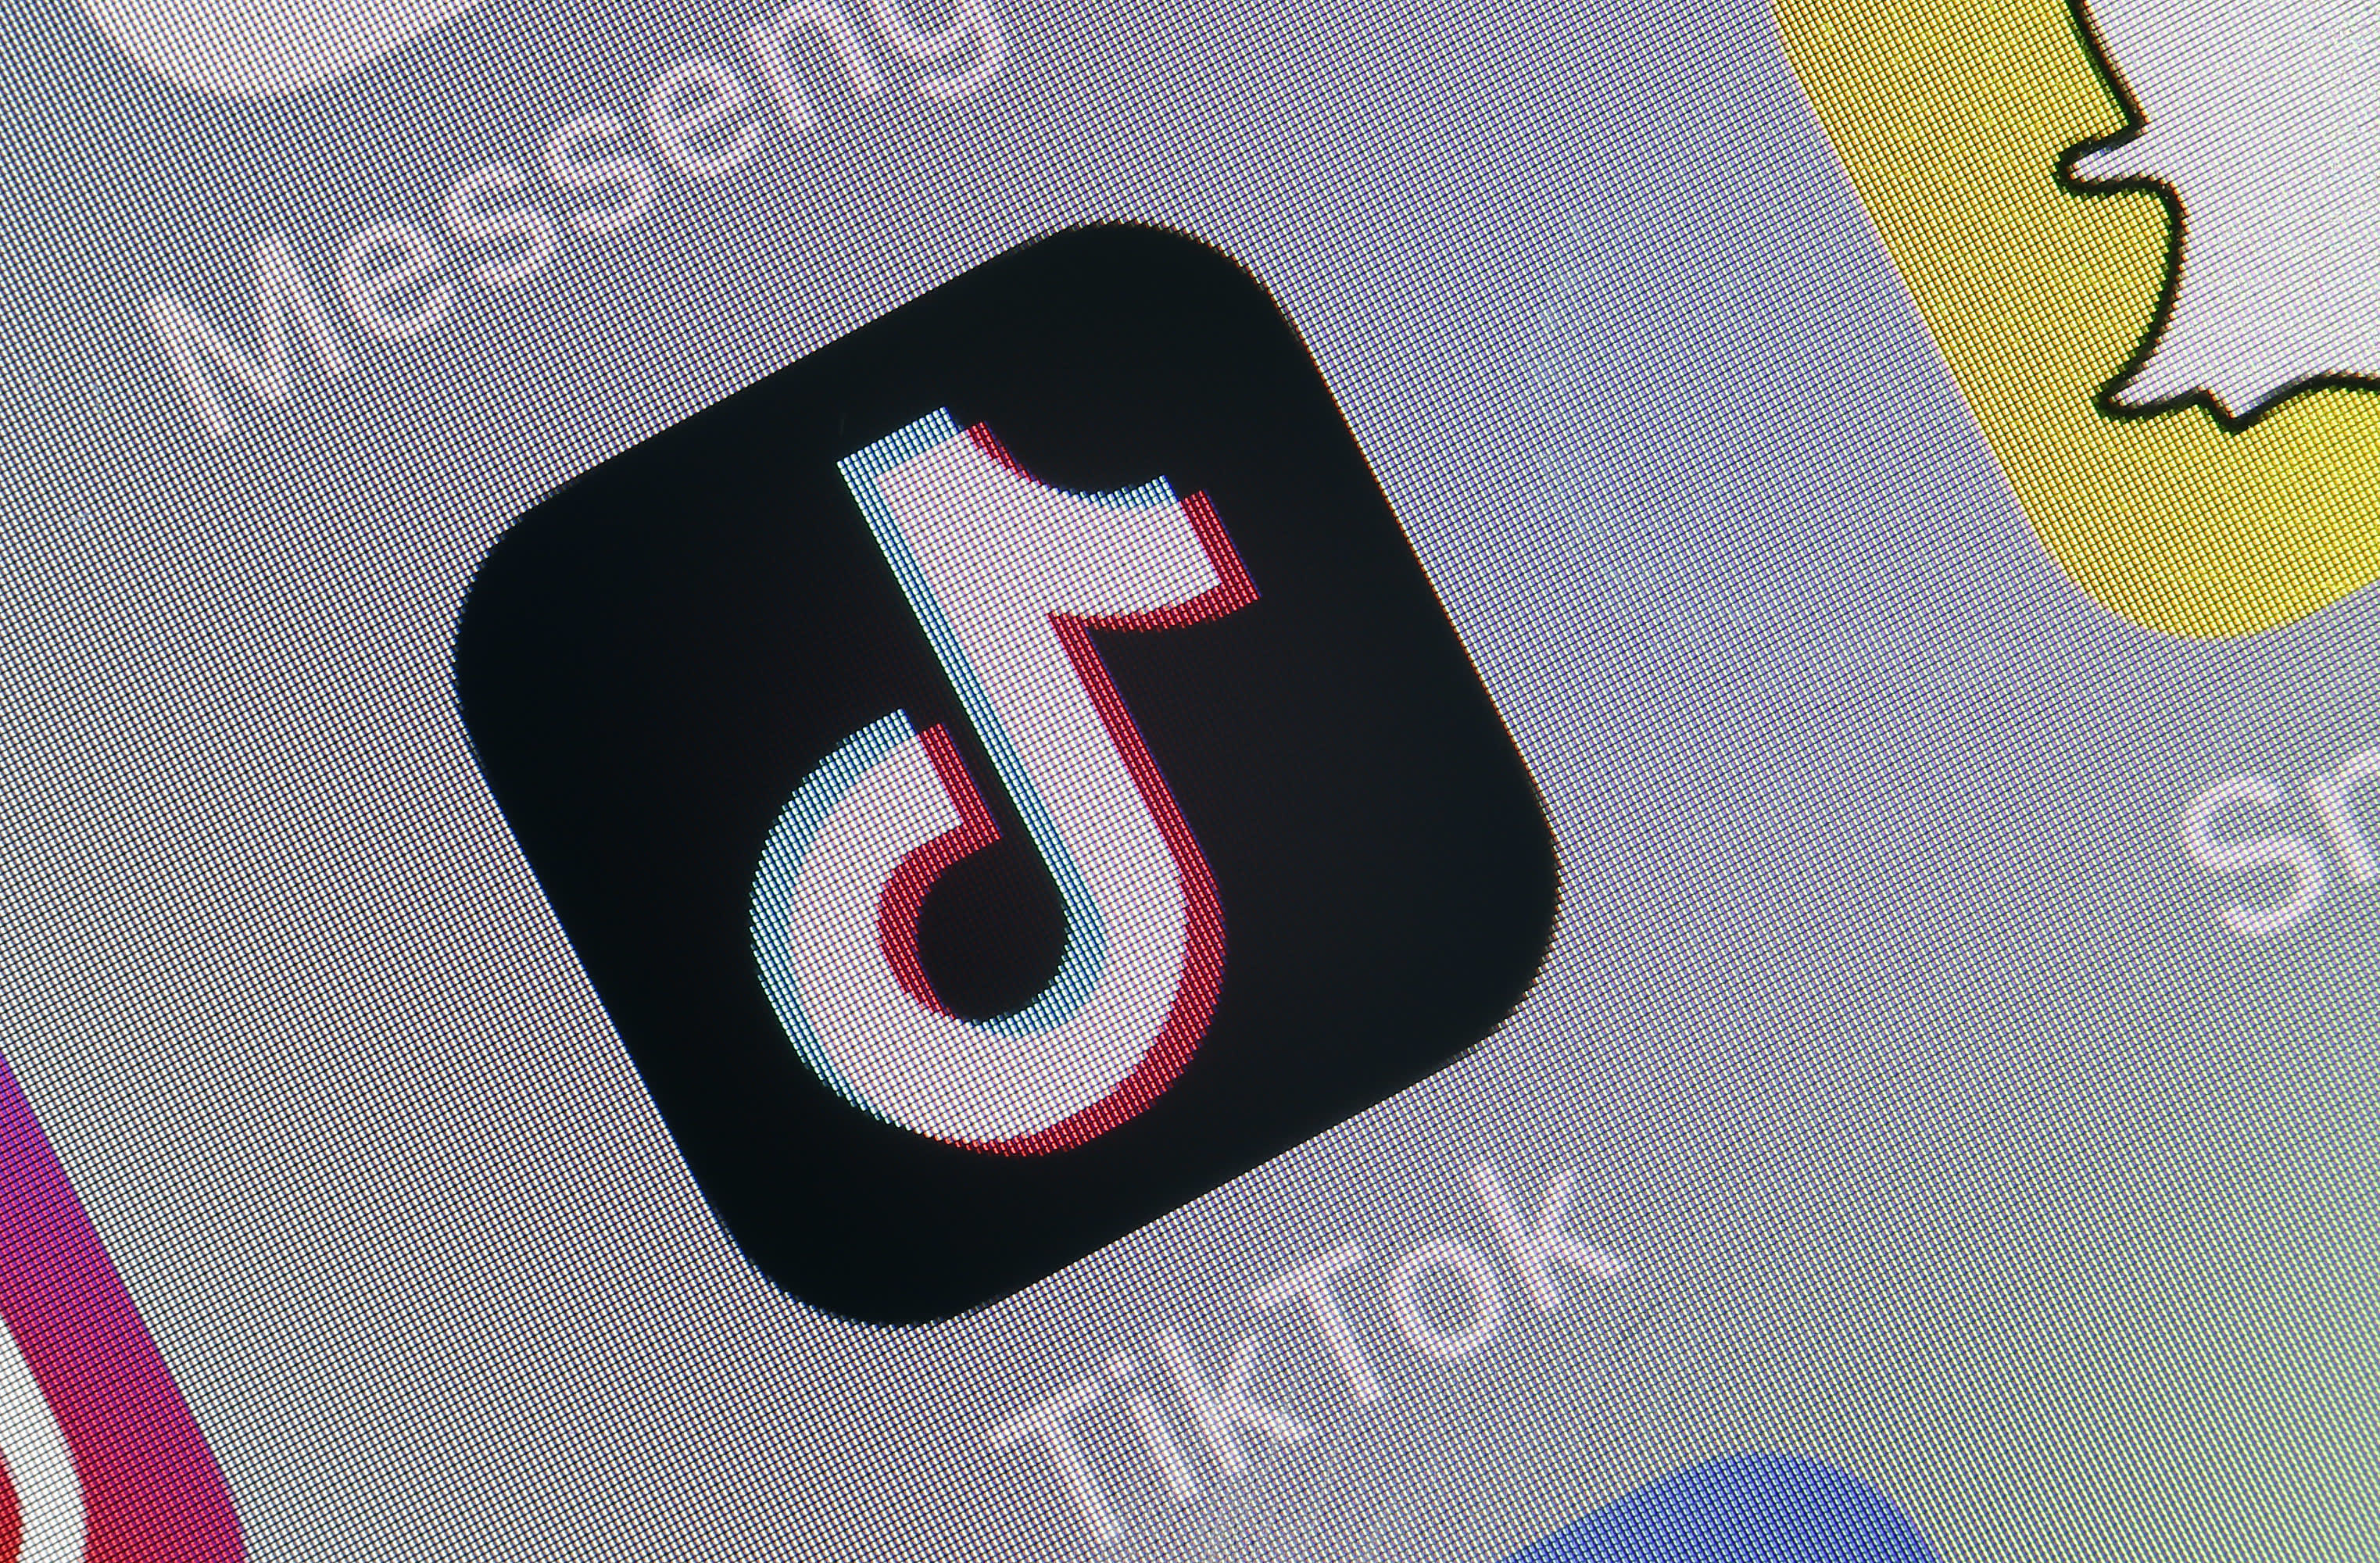 TikTok teens are obsessed with fake luxury products